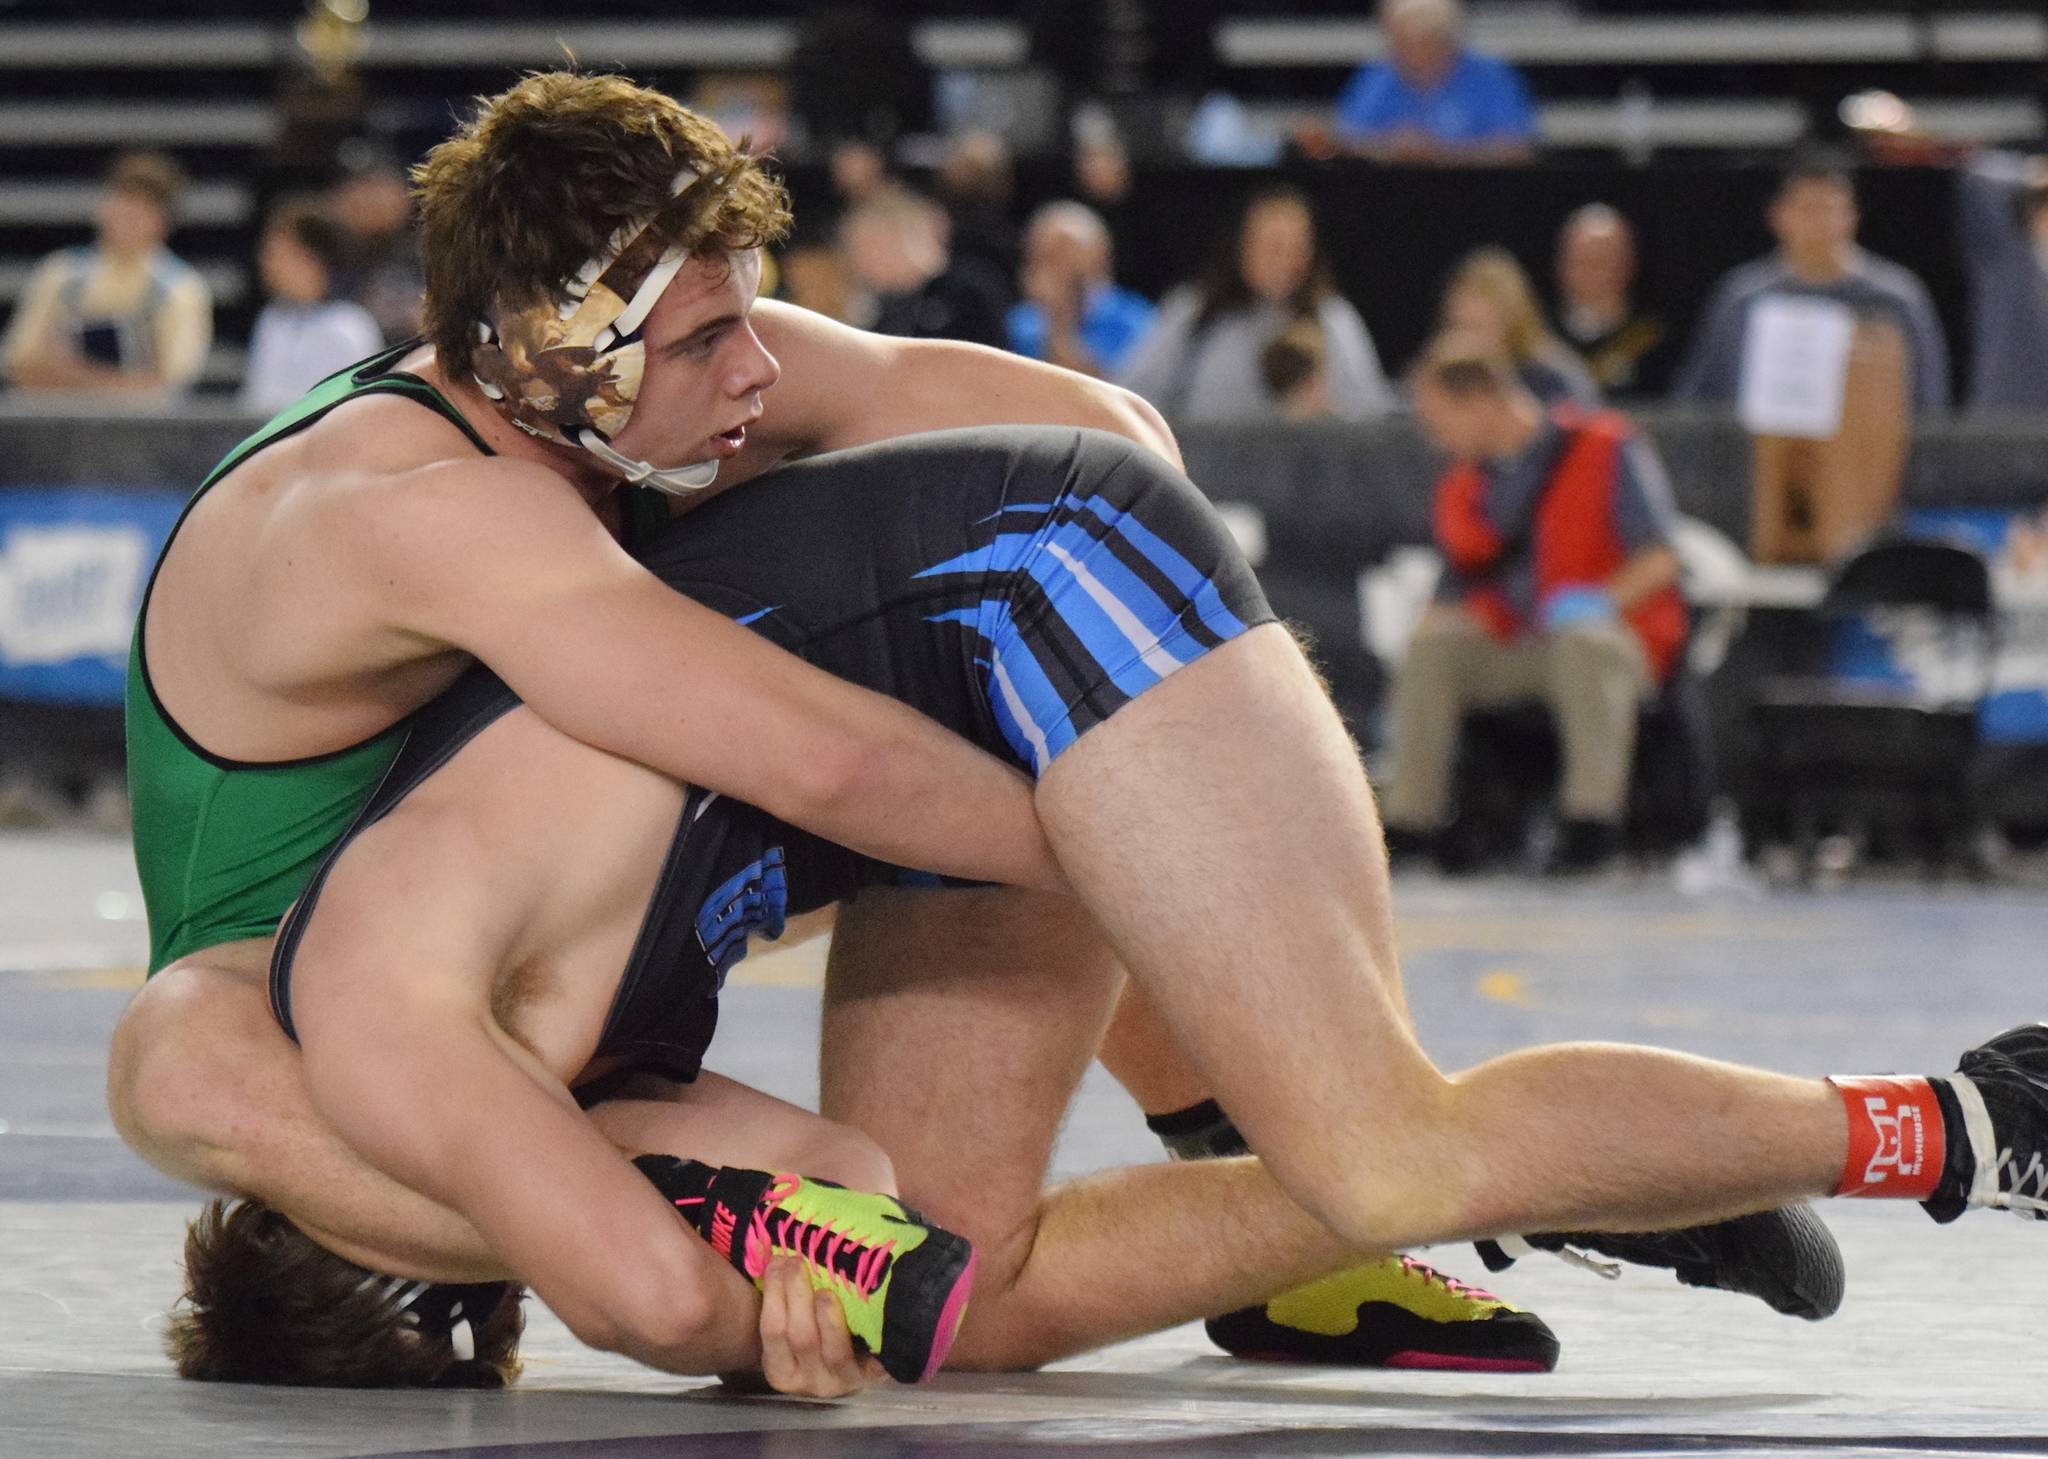 Kentwood’s 195-pound sophomore Dominic Kremer, top, tangles with Central Valley of Spokane’s Cade Byus during consolation round action at Mat Classic XXXI. Kremer won by a 1-0 decision to finish seventh in his weight class. RACHEL CIAMPI, Kent Reporter